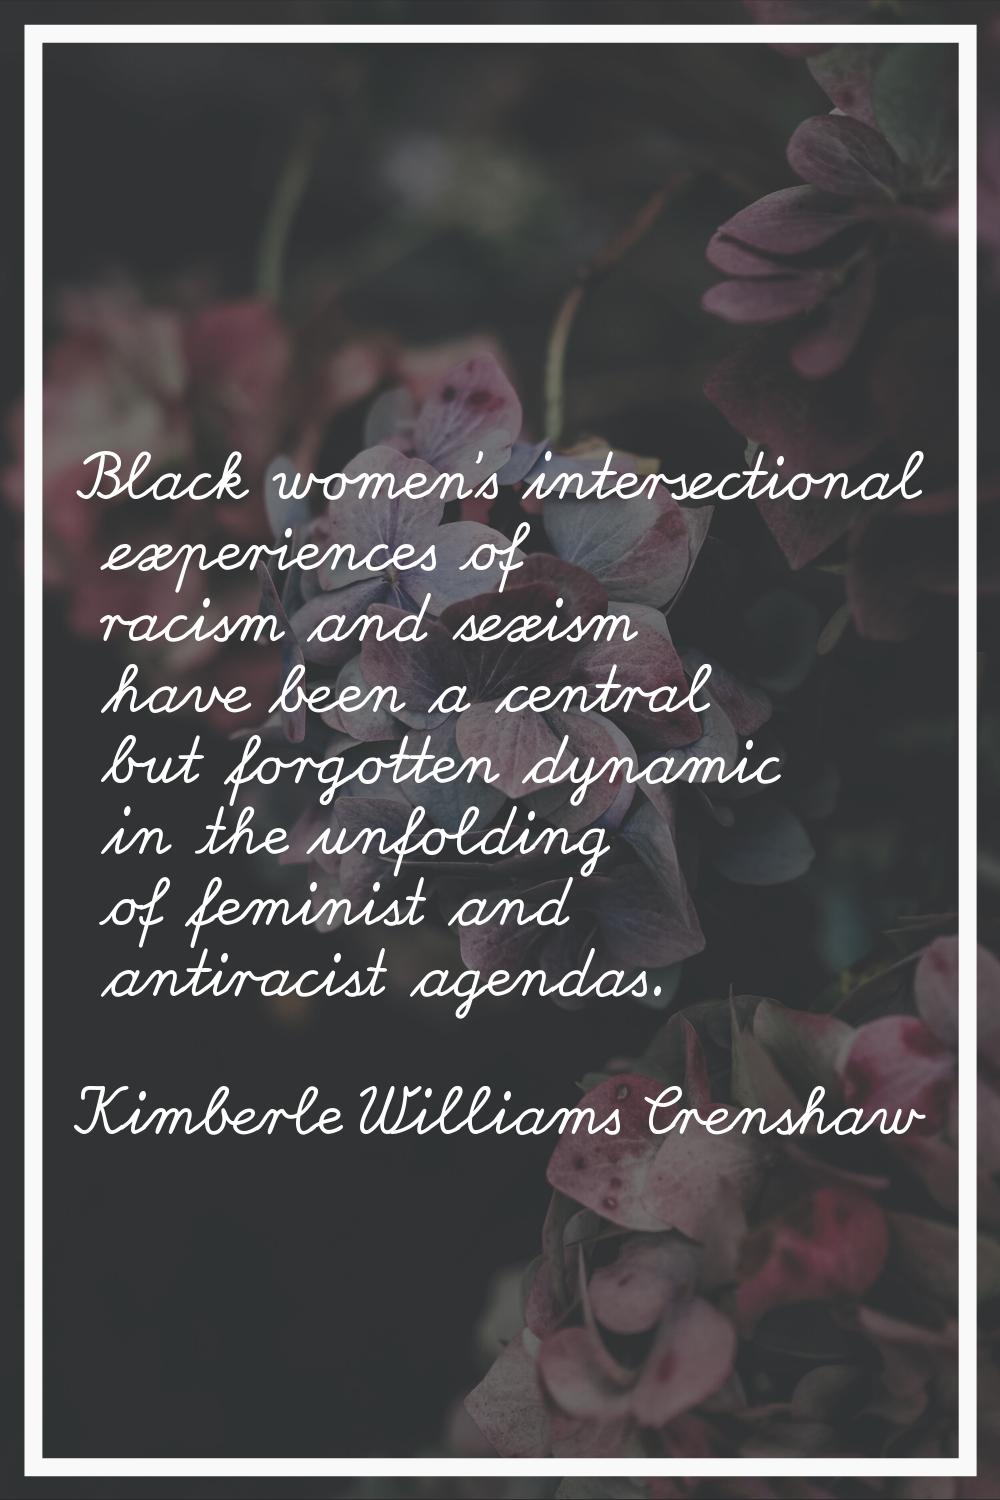 Black women's intersectional experiences of racism and sexism have been a central but forgotten dyn